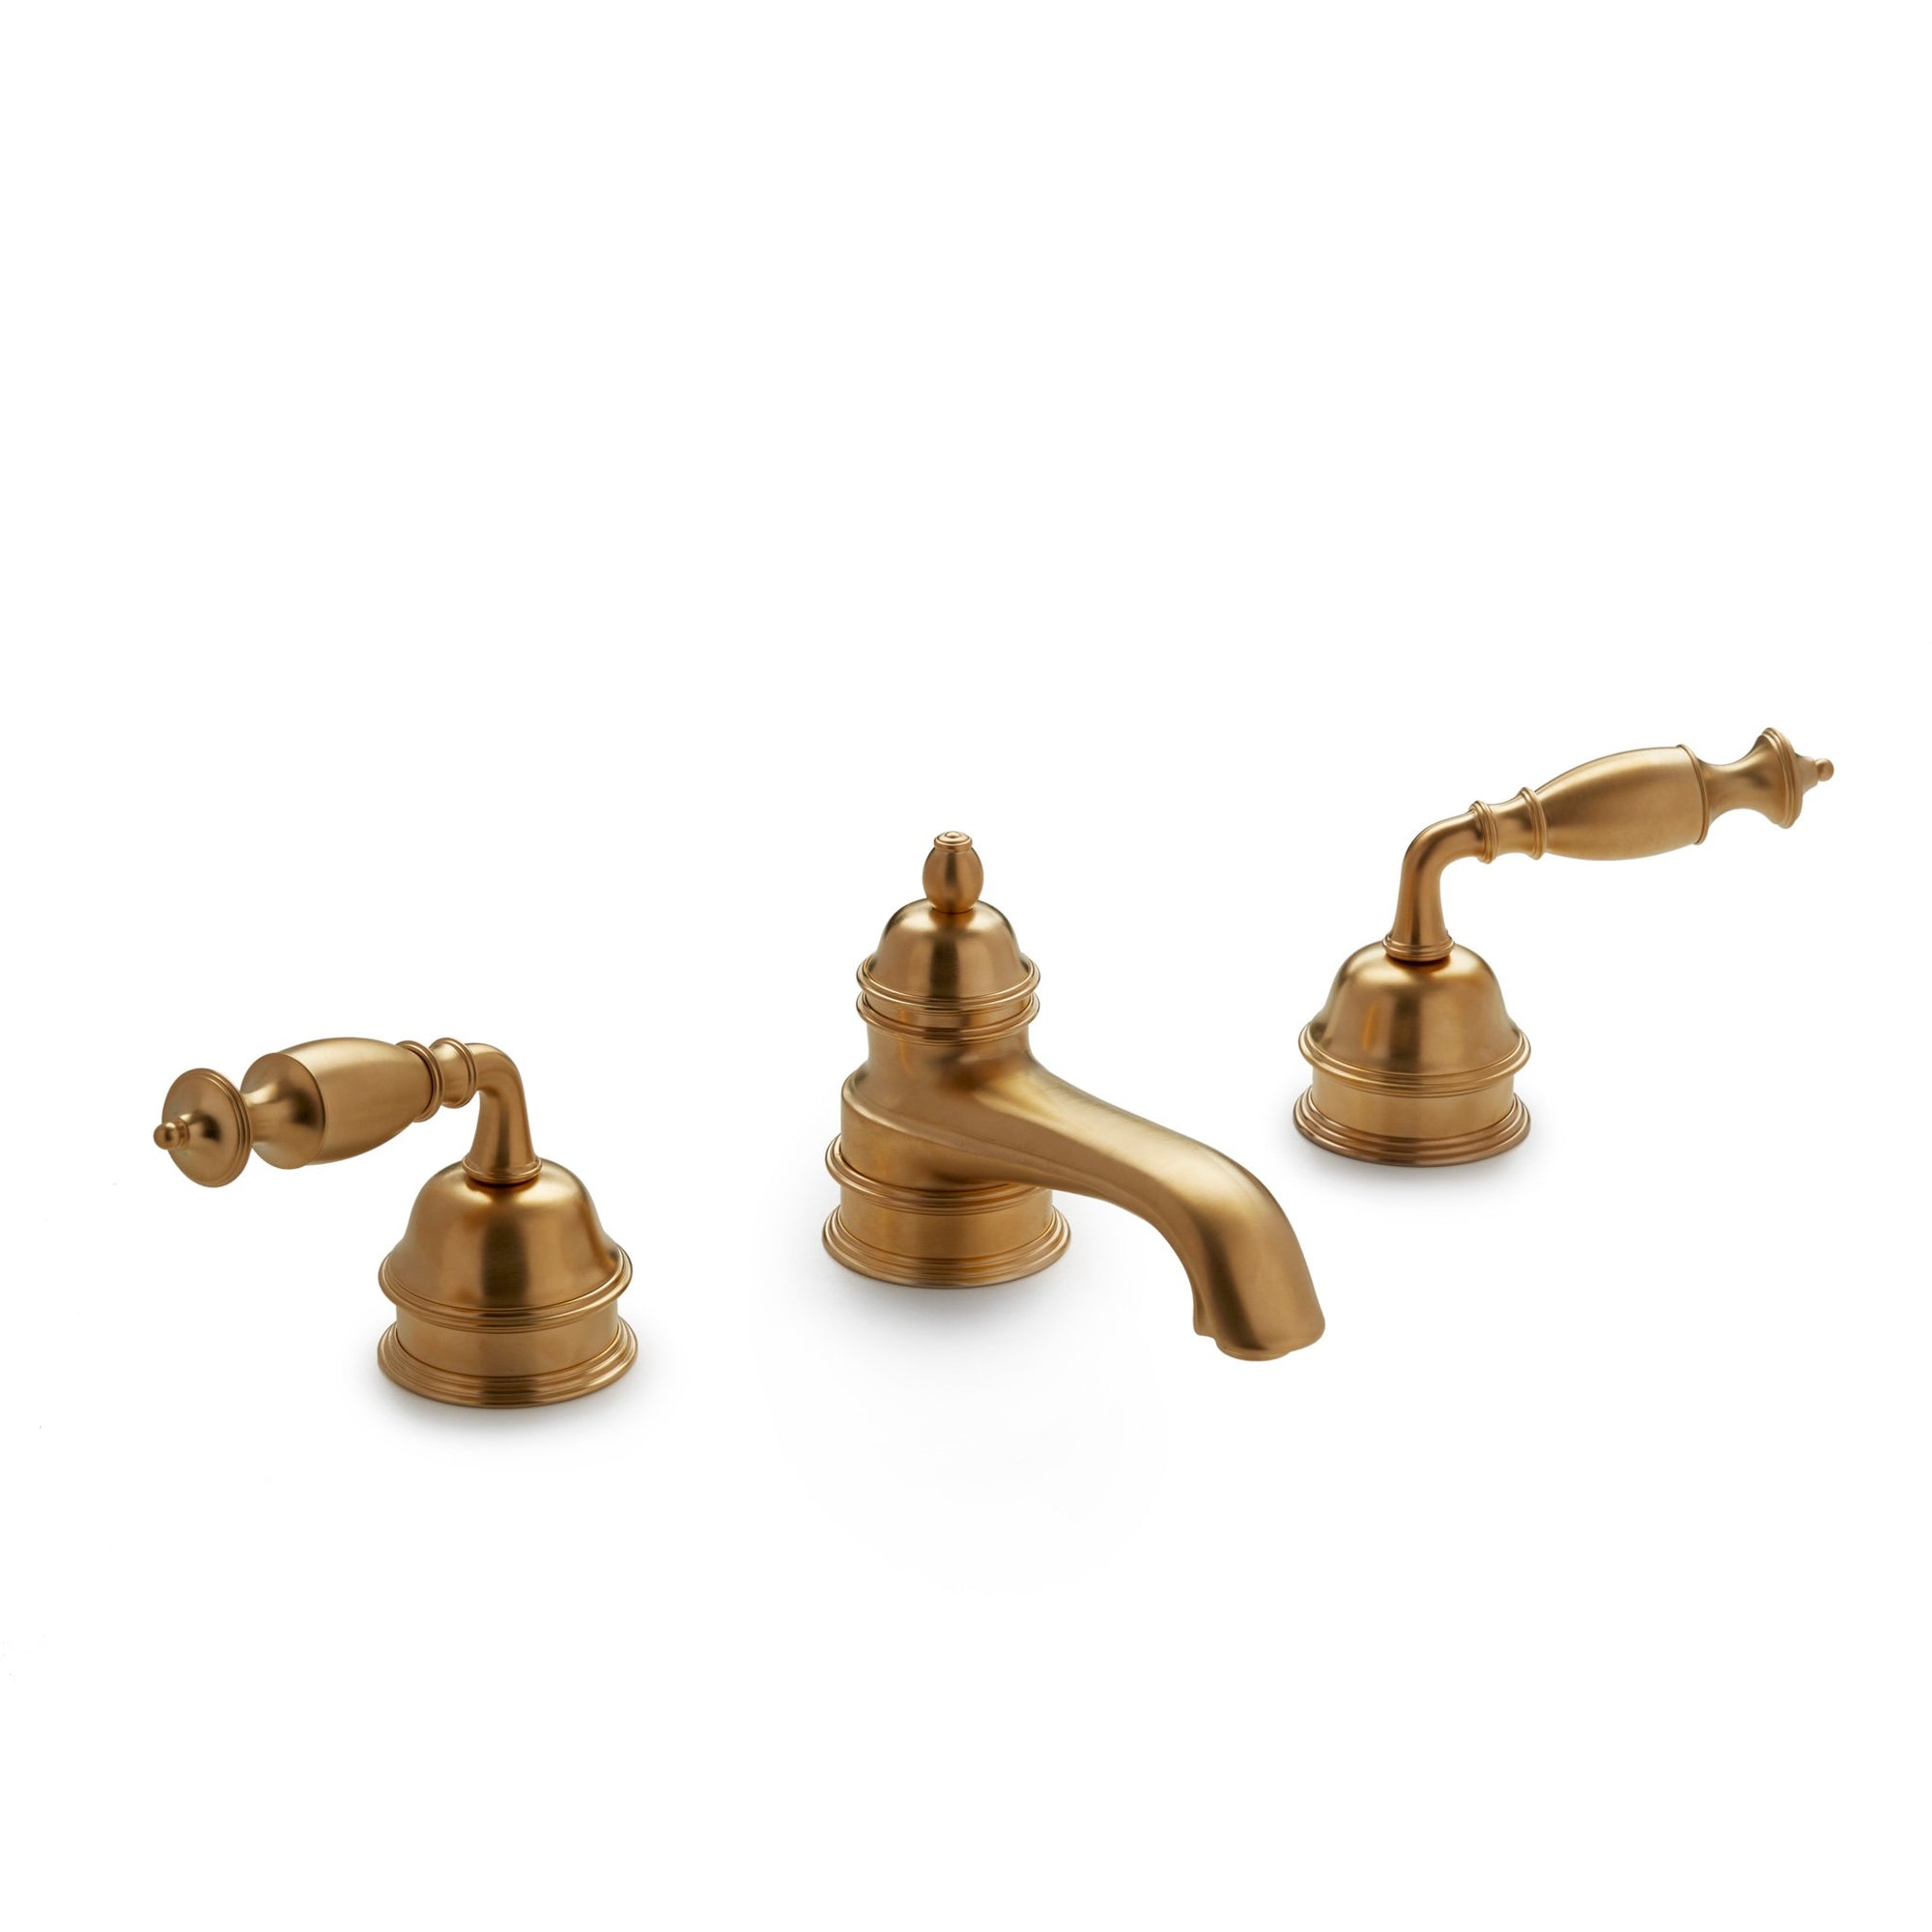 Featured image of post Sherle Wagner Swan Faucet : Listing for all pieces shown, 2 faucets, two handles, four pieces of hardware.